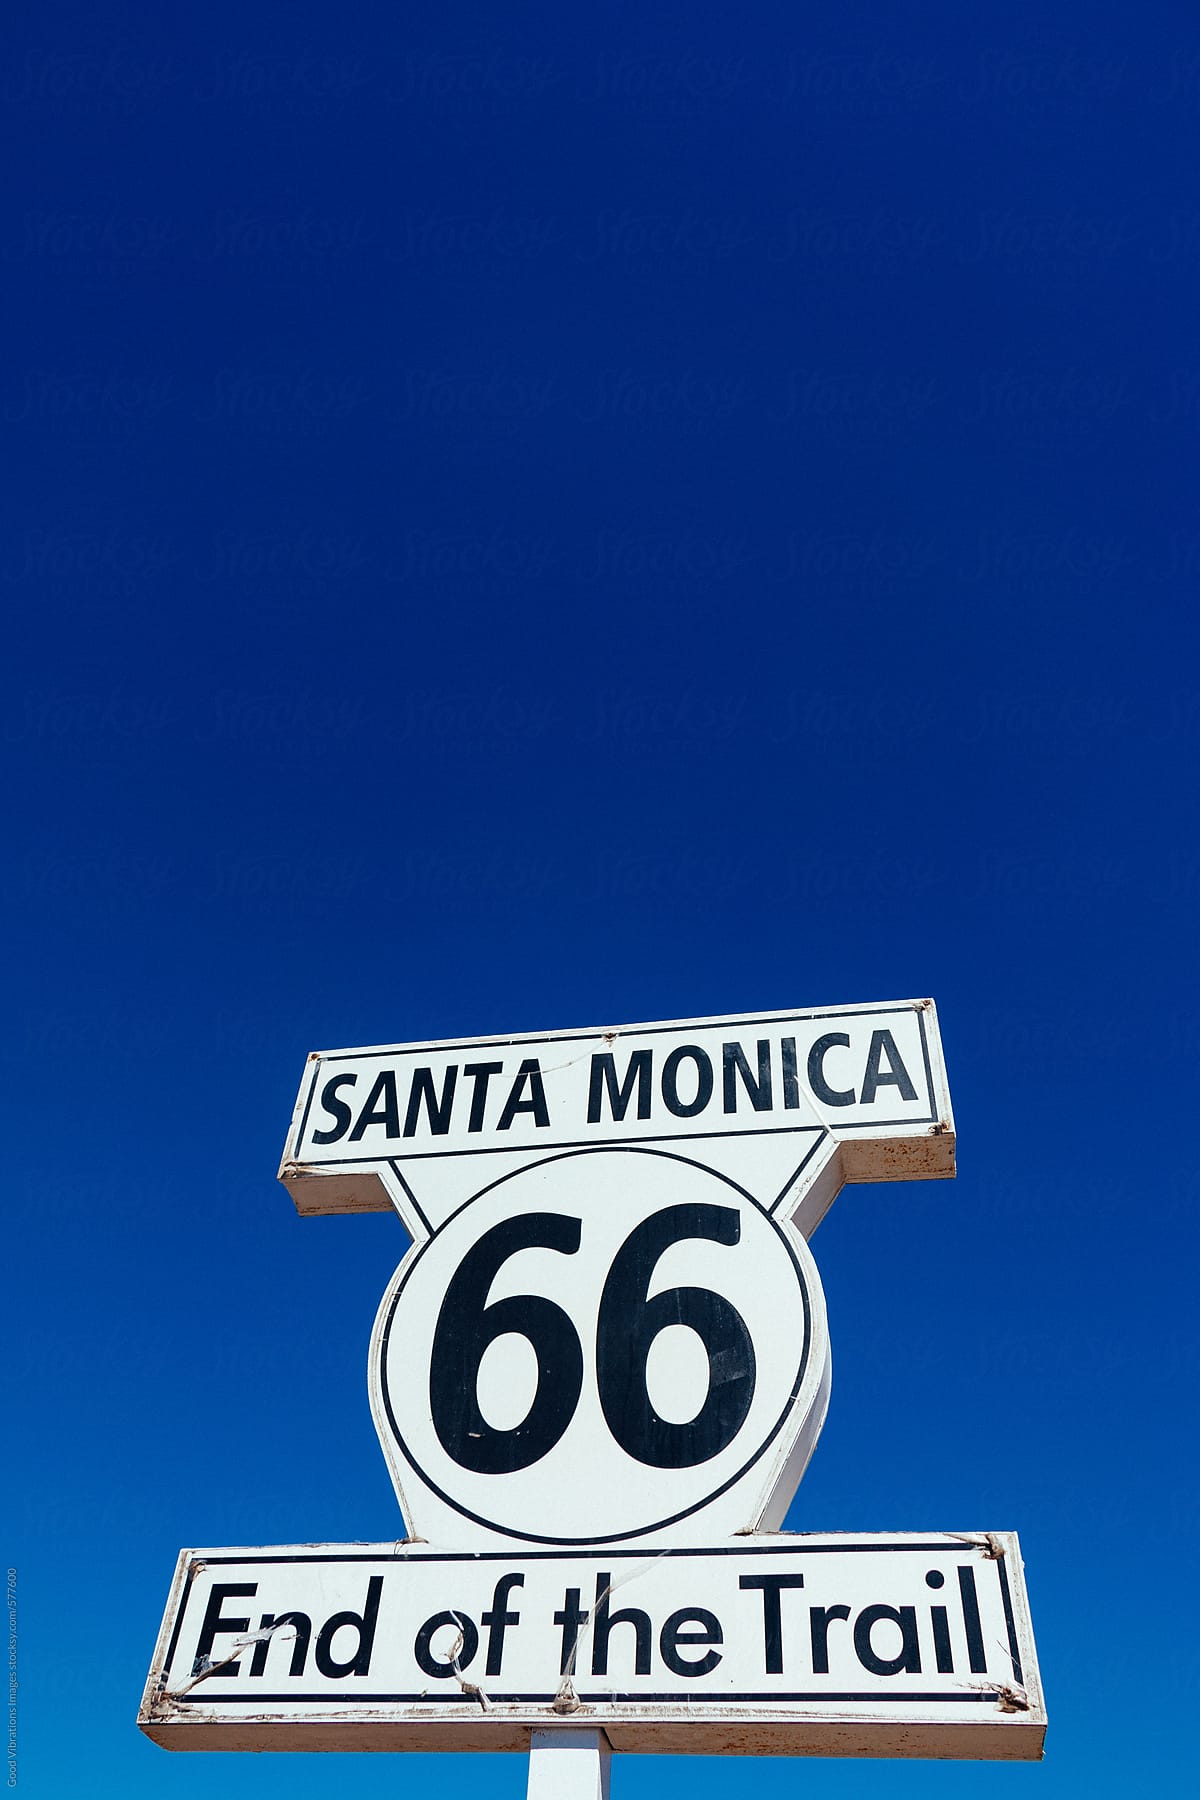 Route 66 End of the Trail in Santa Monica